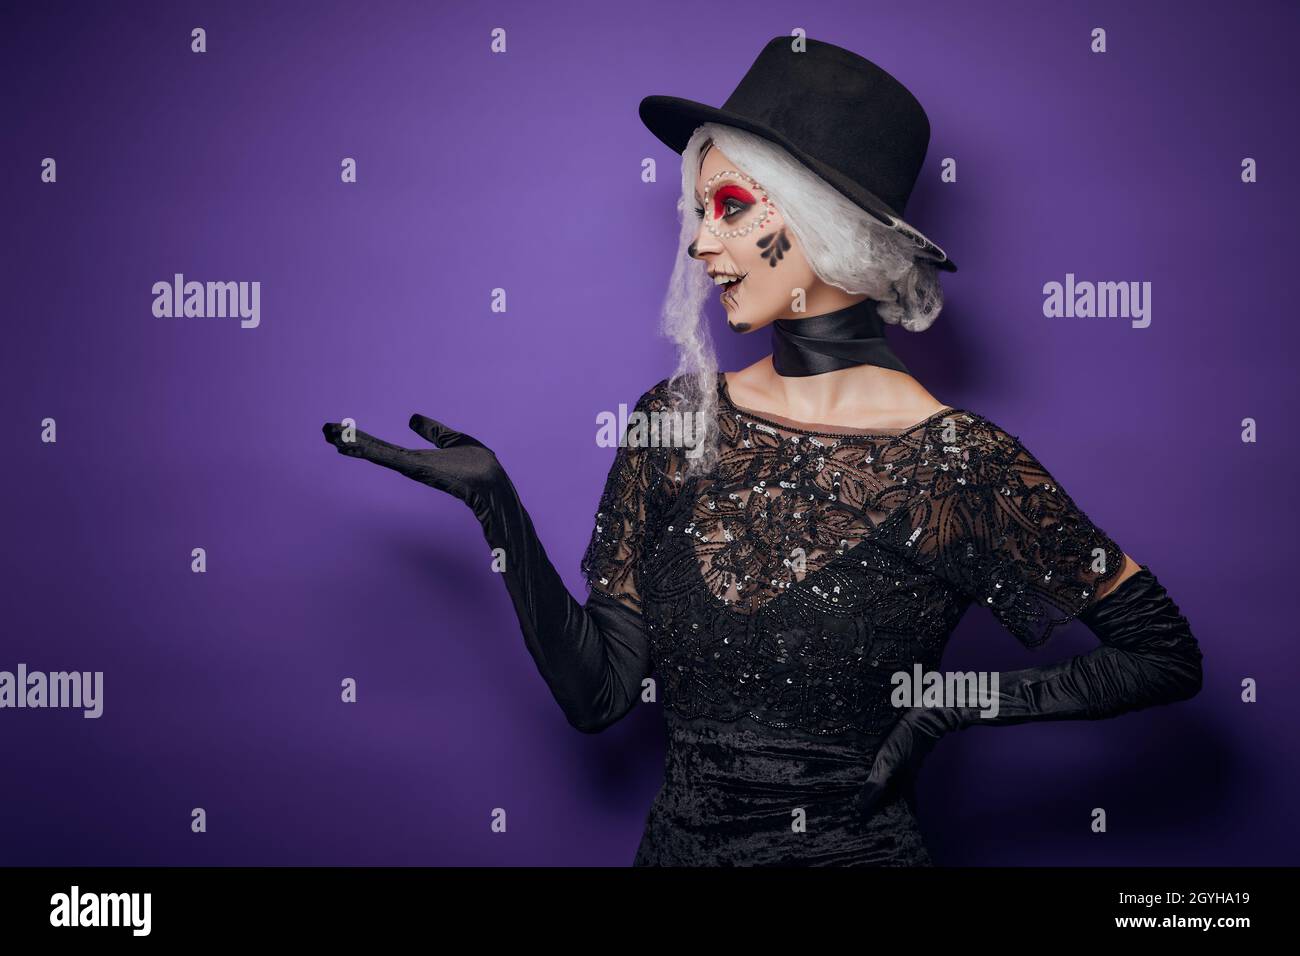 Cheerful young woman with grey hair in Halloween costume pointing Stock Photo